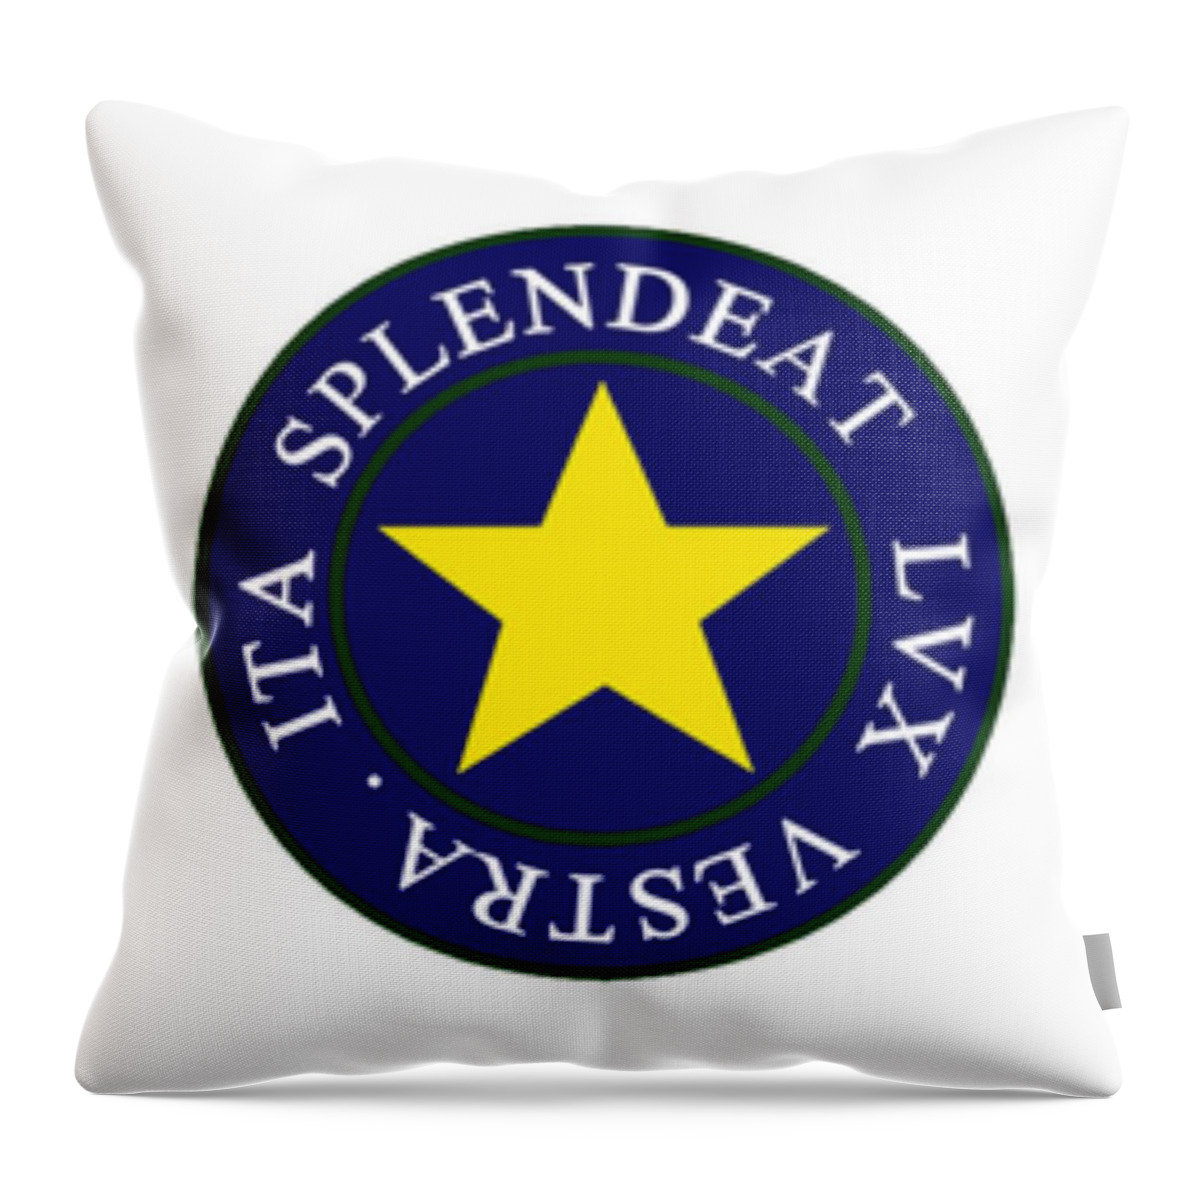 Student Association Throw Pillow featuring the photograph Meadowbrook High School by Trevor A Smith